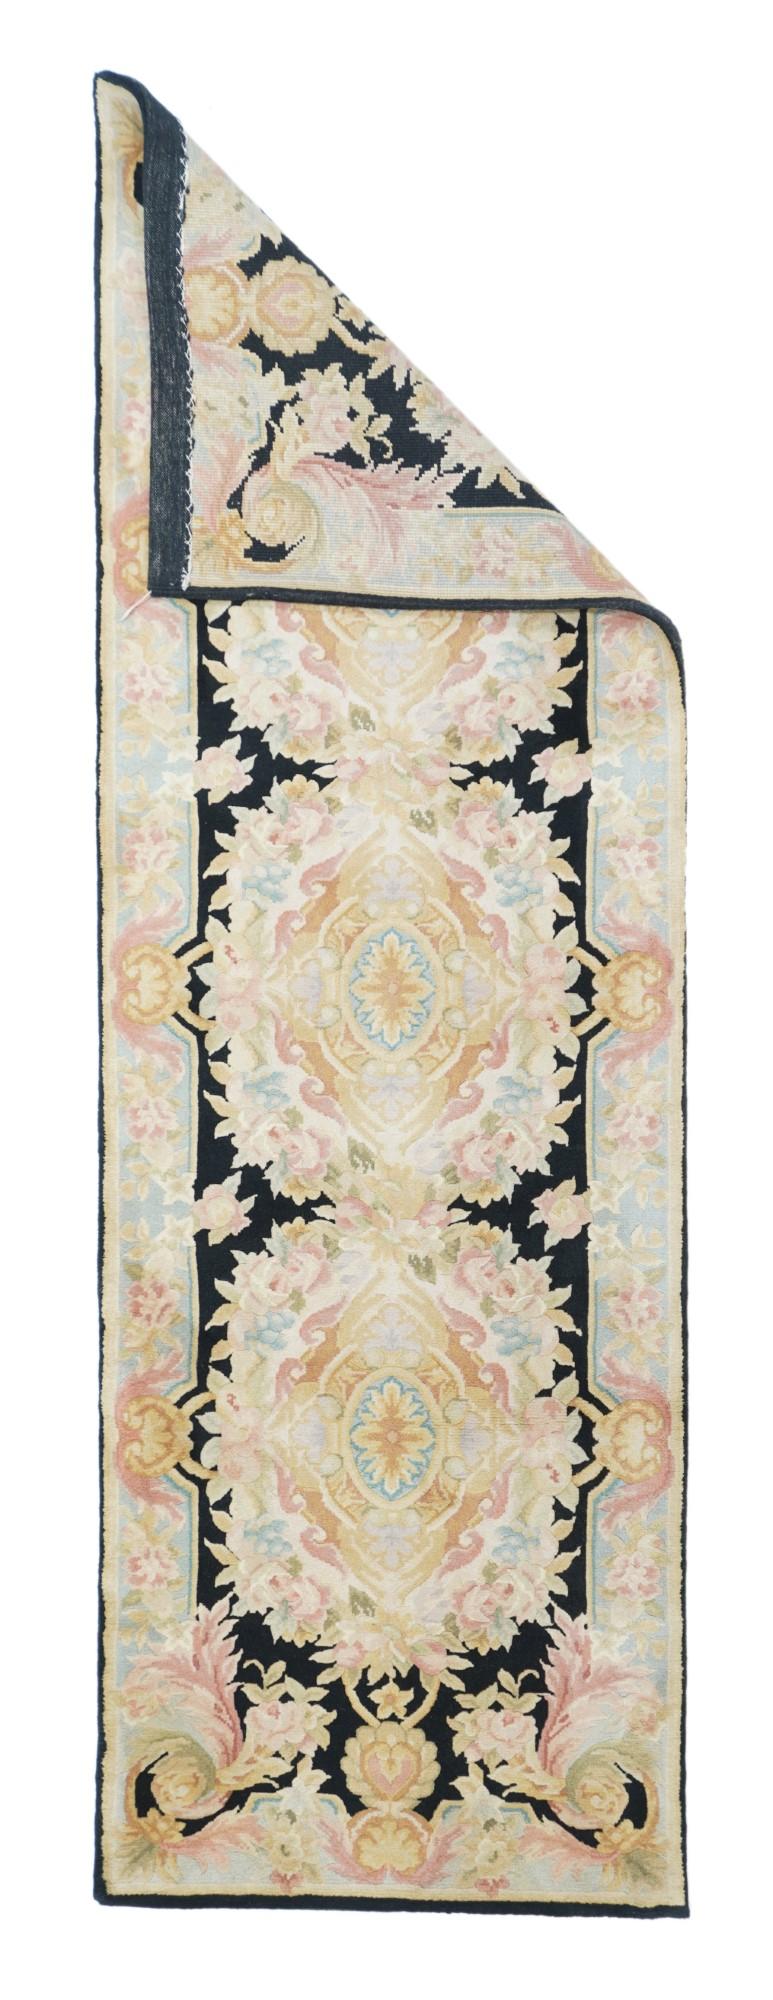 Savonnerie runner 2'6'' x 8'. The black field features three connected squared elliptical cartouche medallions with scrolled salmon centres, and leaf edges. Broken cream border with straw scallop shell intrusions. Medium weave, cotton foundation. We